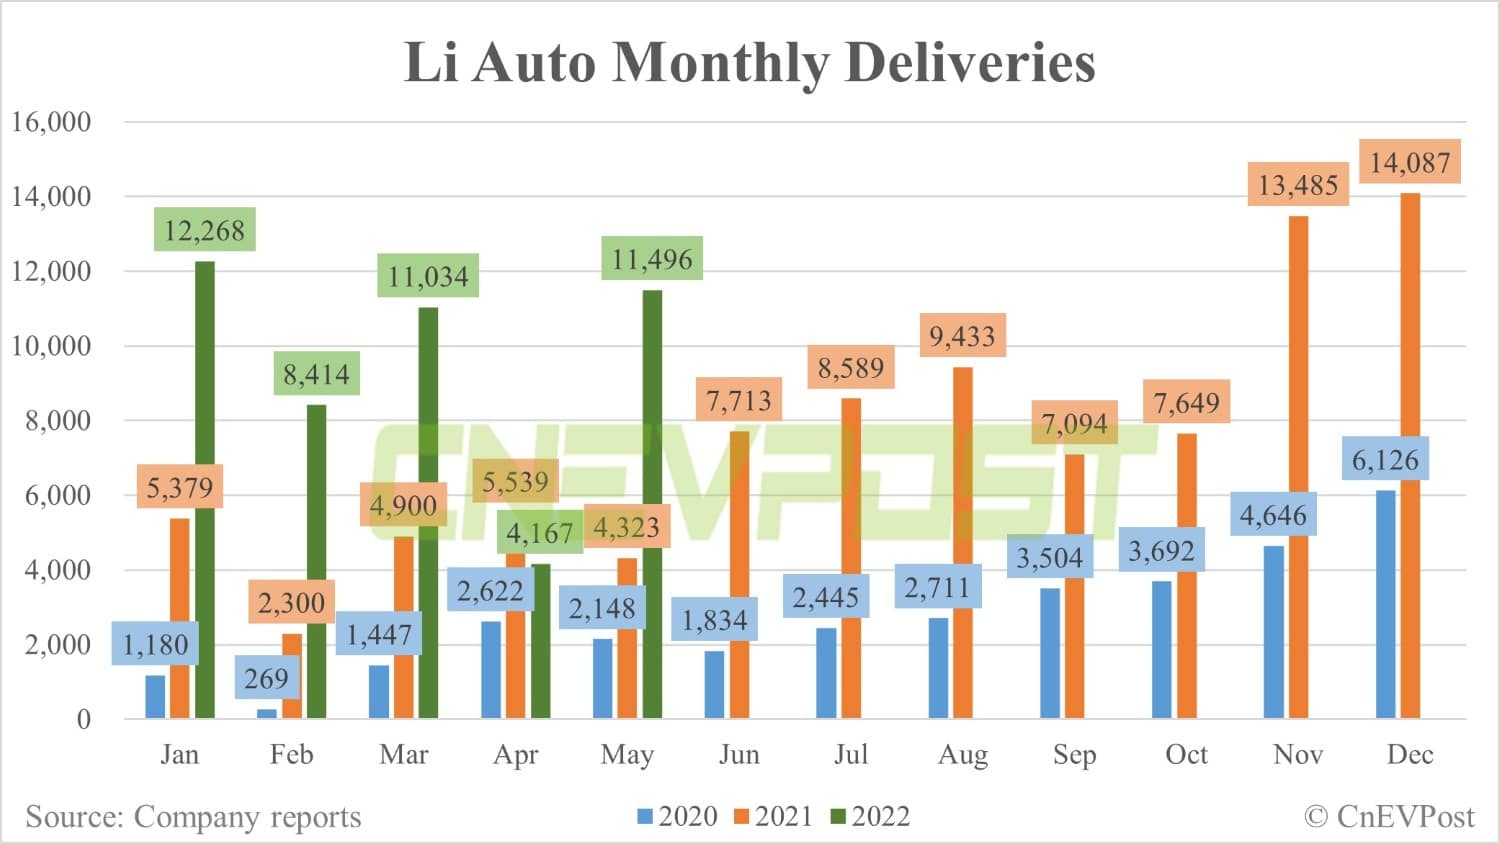 Li Auto delivers 11,496 vehicles in May, up 176% from April-CnEVPost